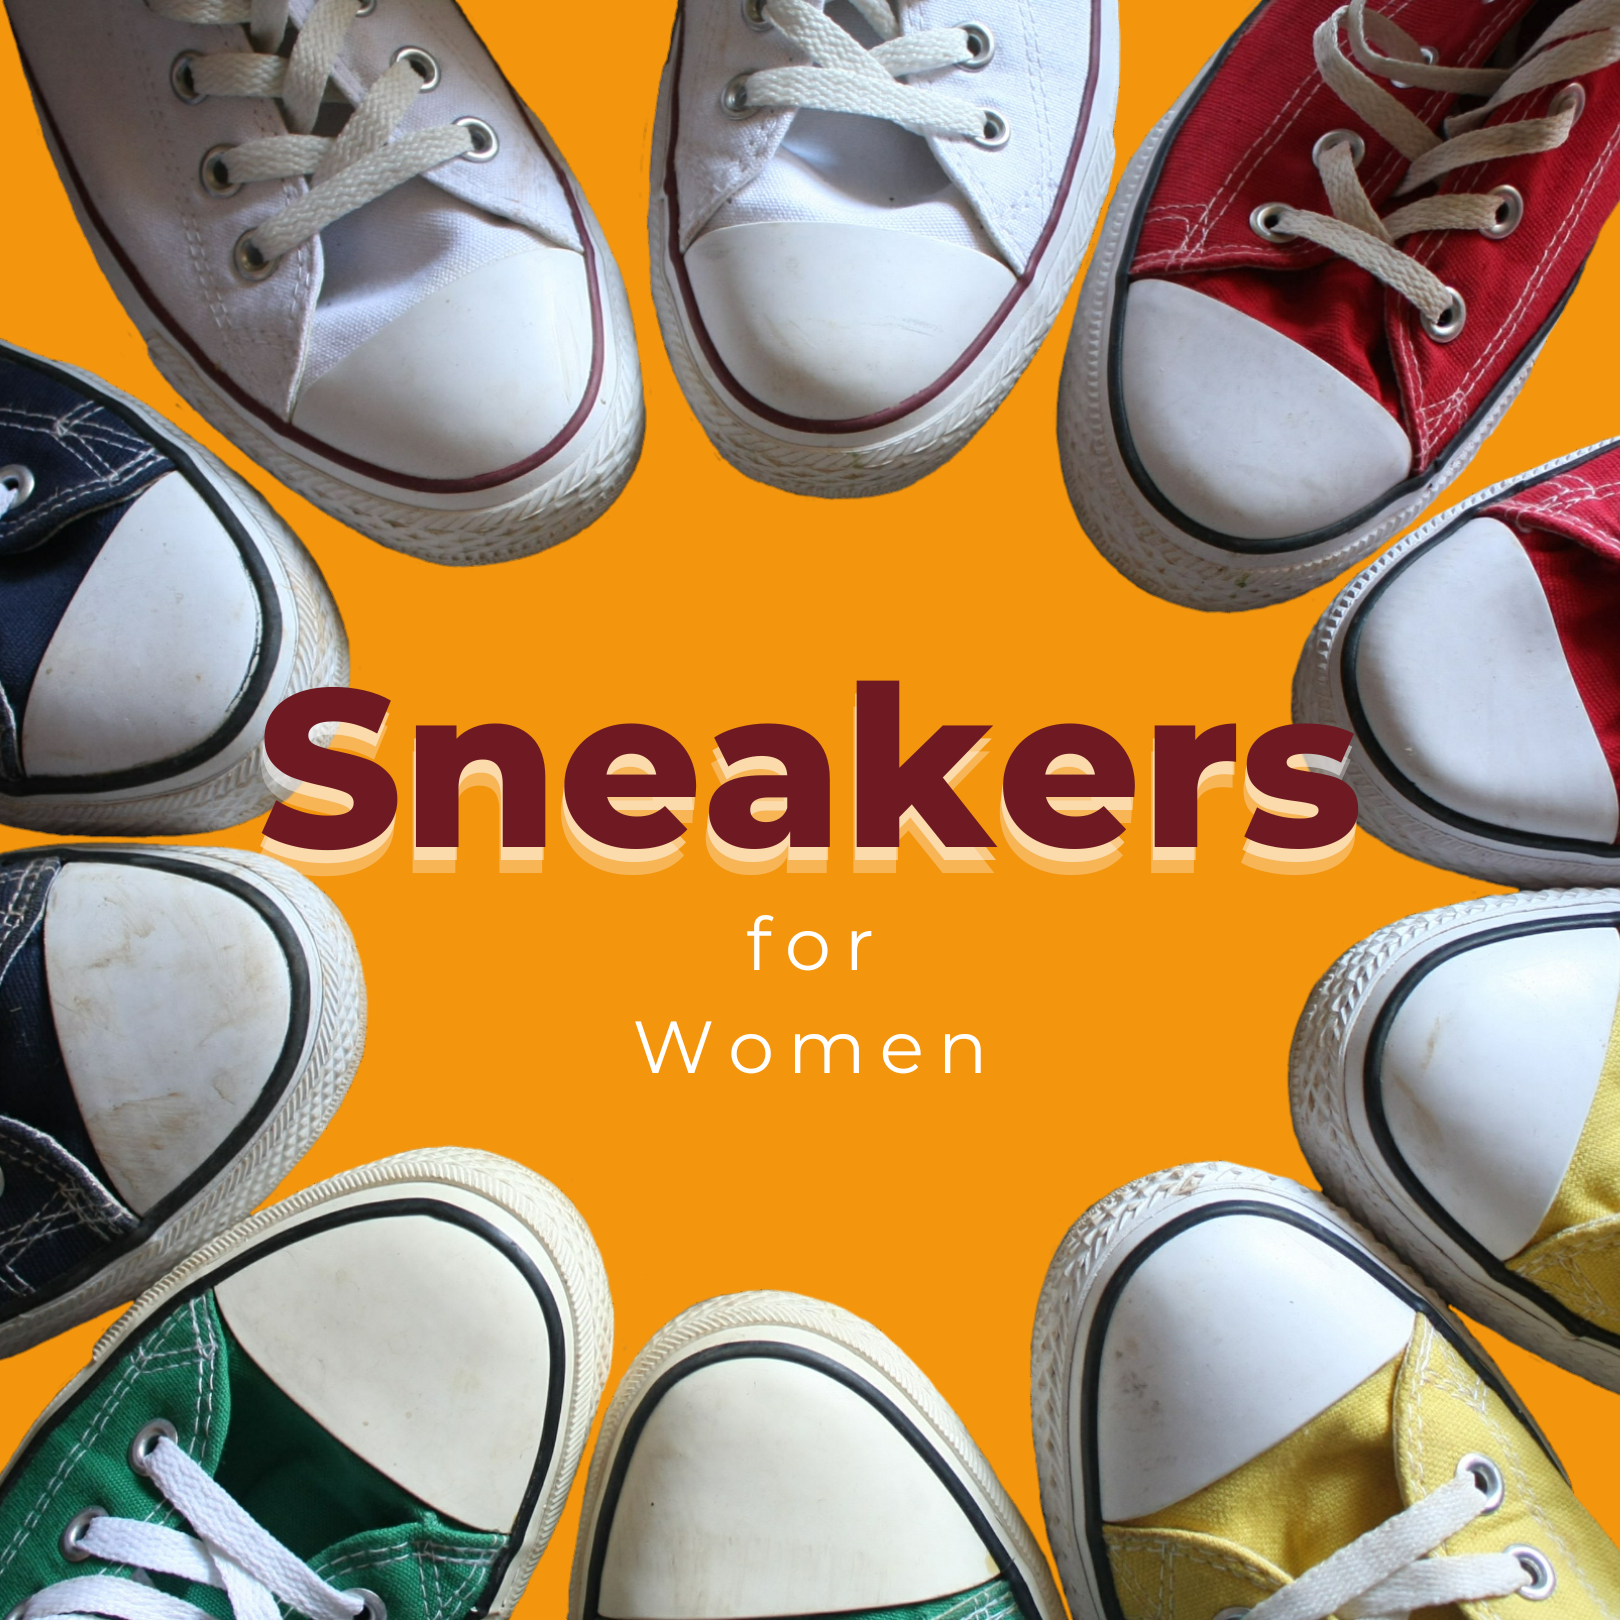 Kick it Up a Notch: Explore Our Trendsetting Women's Sneaker and Tennis Shoe Collection